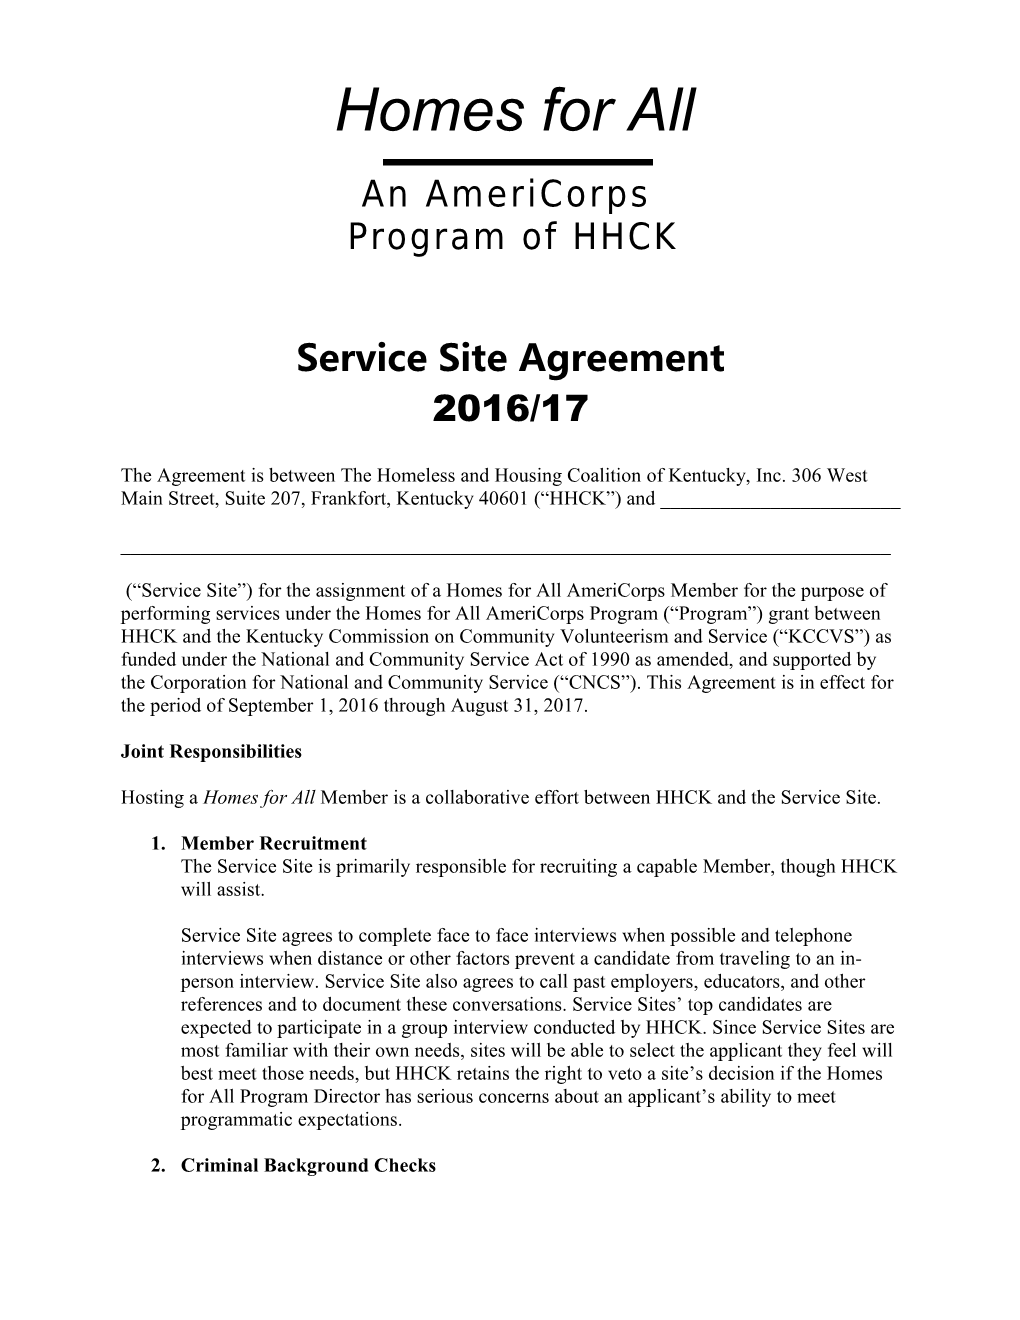 Service Site Agreement